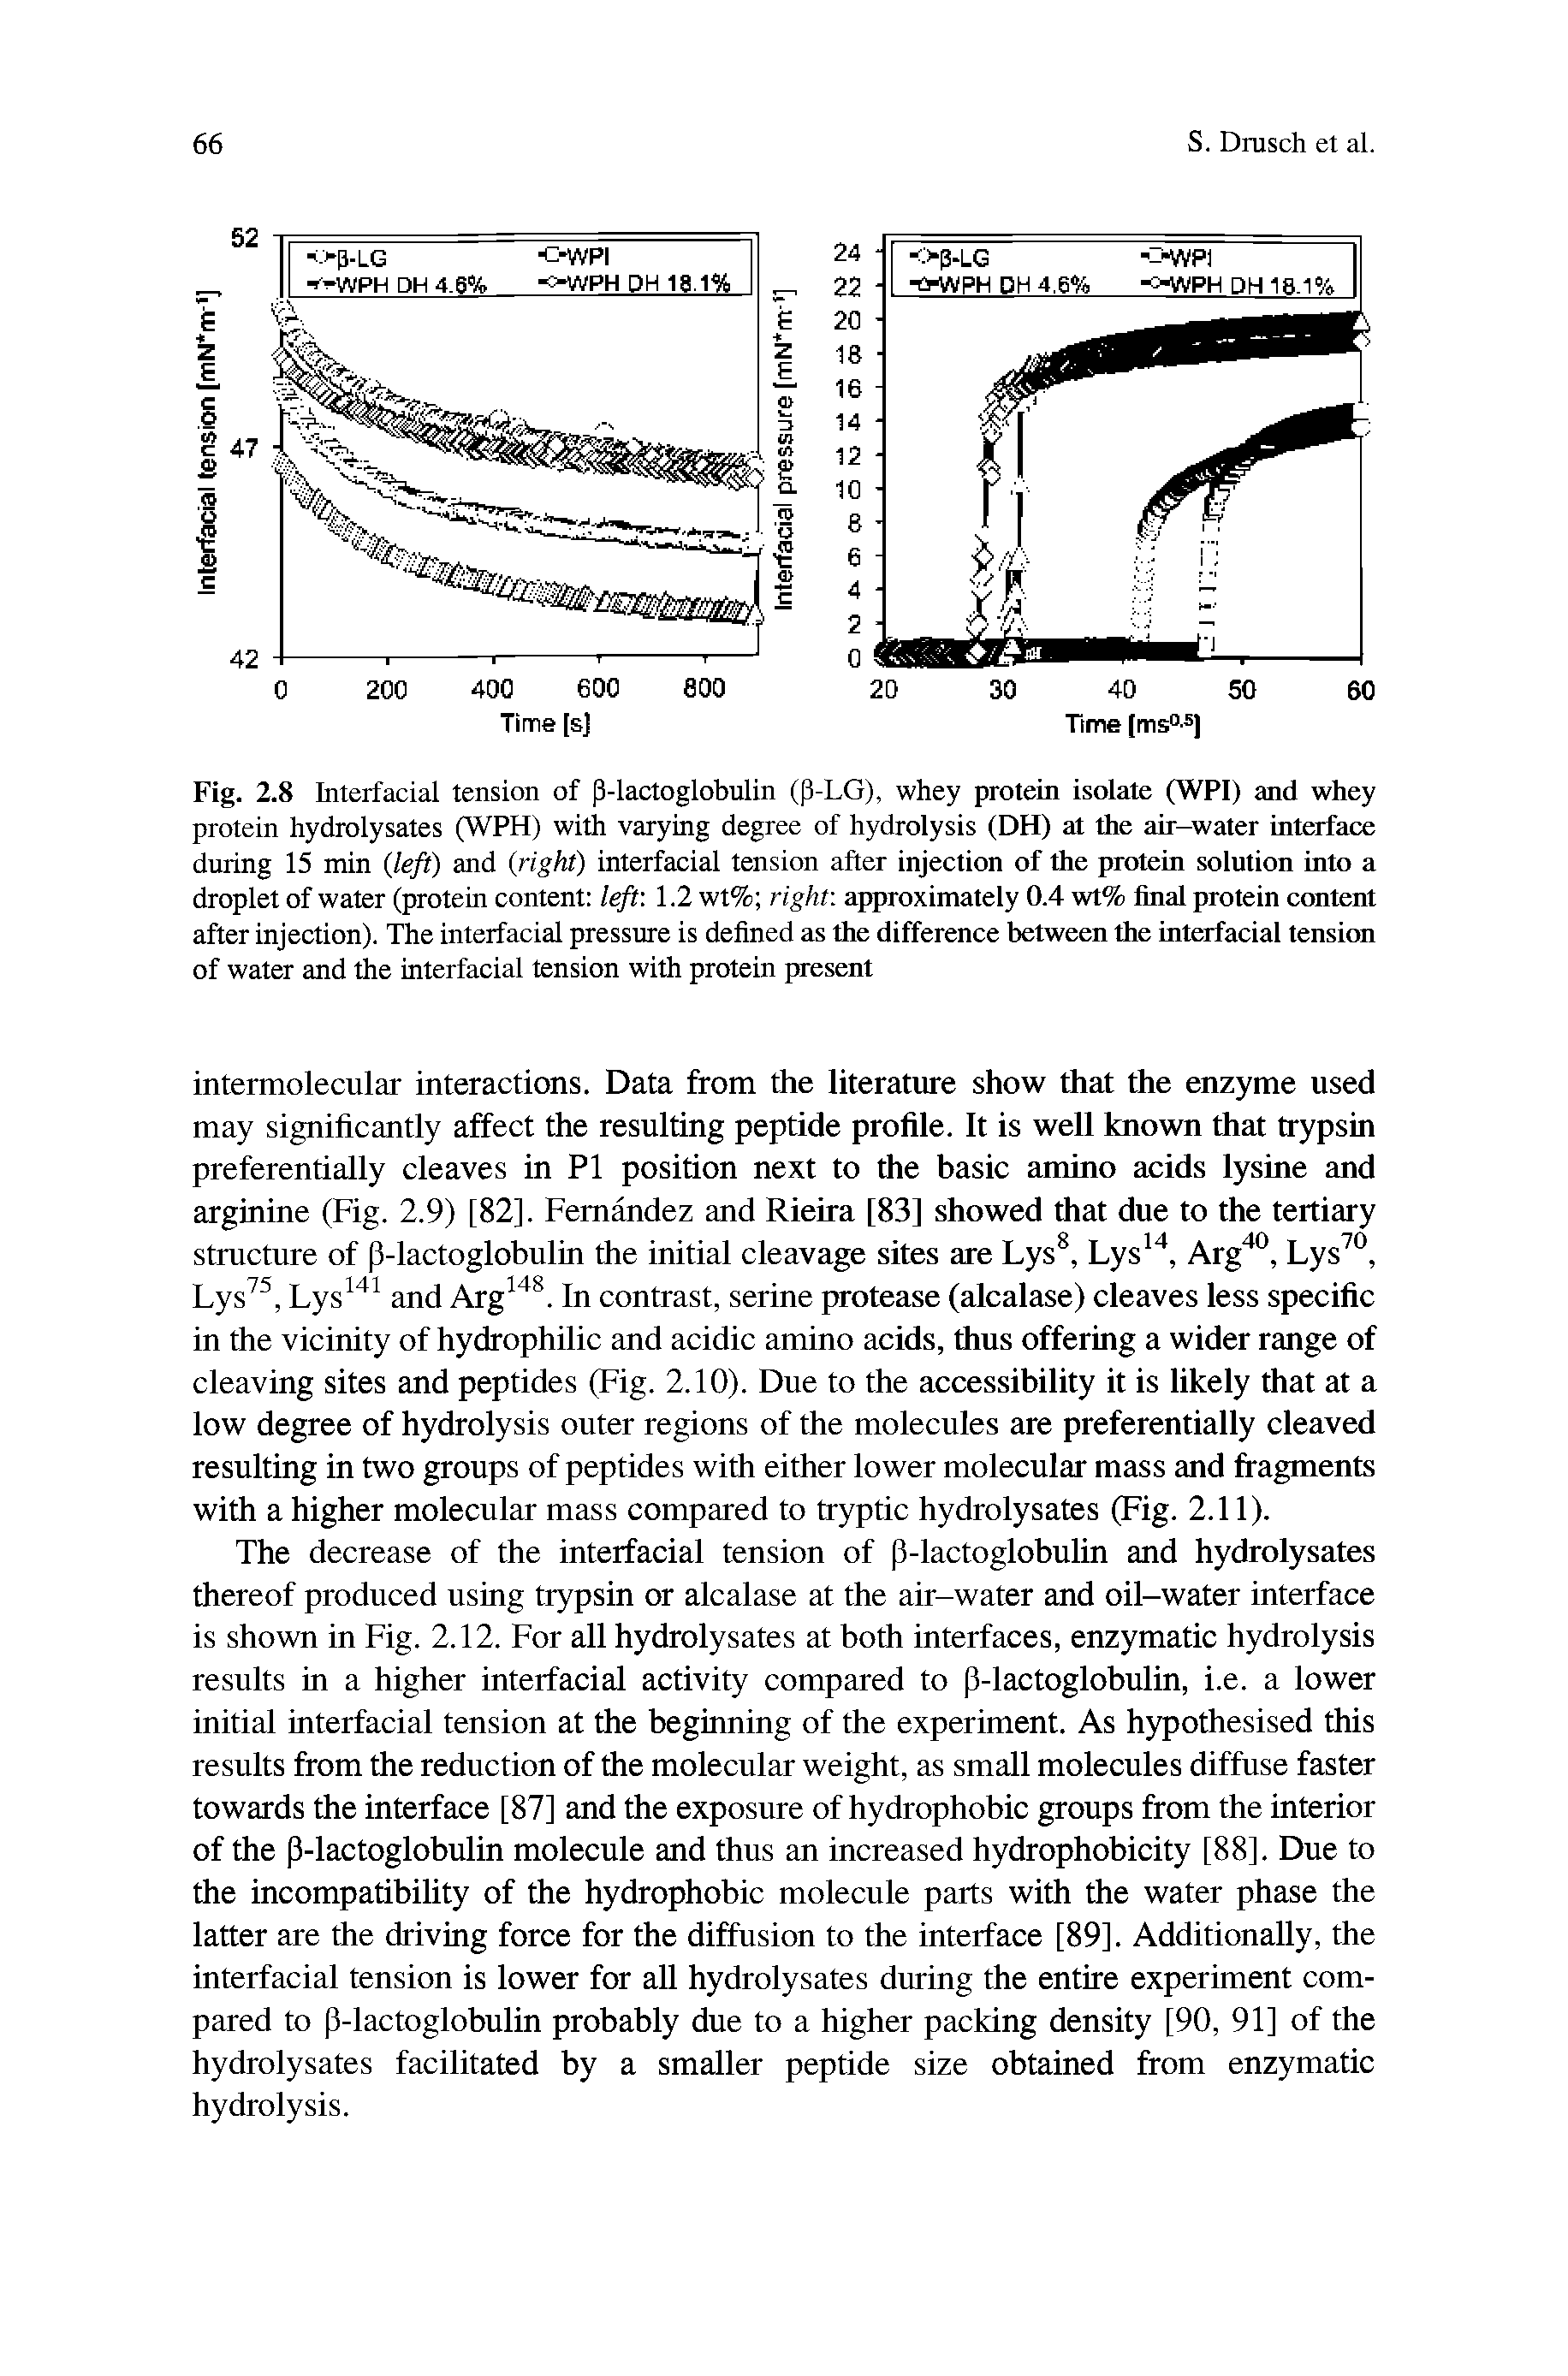 Fig. 2.8 Interfacial tension of p-lactoglobulin (P-LG), whey protein isolate (WPI) and whey protein hydrolysates (WPH) with varying degree of hydrolysis (DH) at the air-water interface during 15 min (left) and right) interfacial tension after injection of the protein solution into a droplet of water (protein content /e/t 1.2 wt% right, approximately 0.4 wt% final protein content after injection). The interfacial pressure is defined as the difference between the interfacial tension of water and the interfacial tension with protein present...